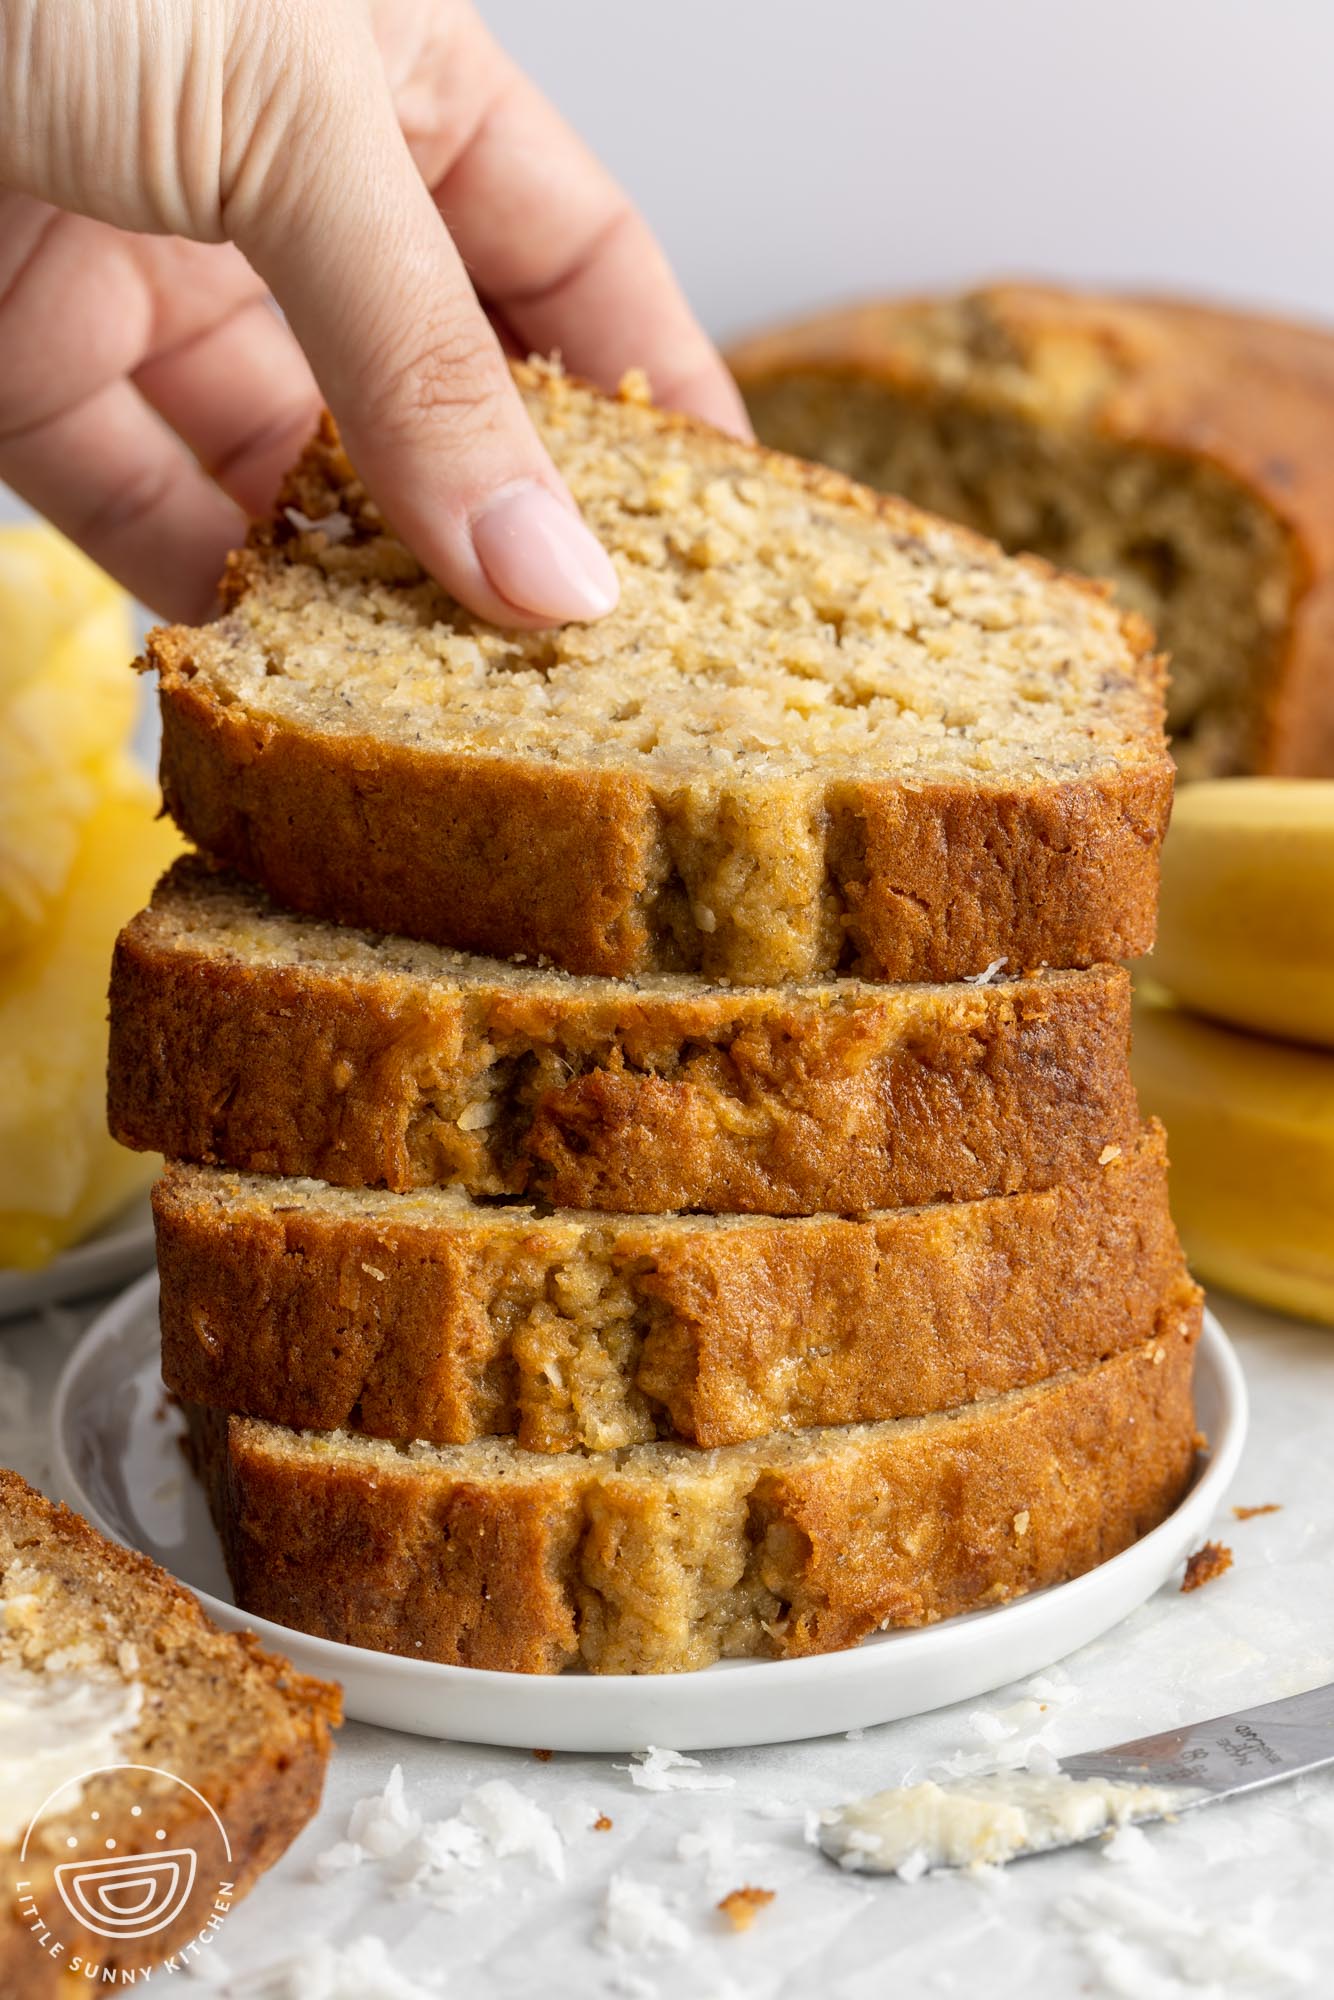 a stack of thick slices of banana bread on a plate. A hand is picking a slice from the pile.